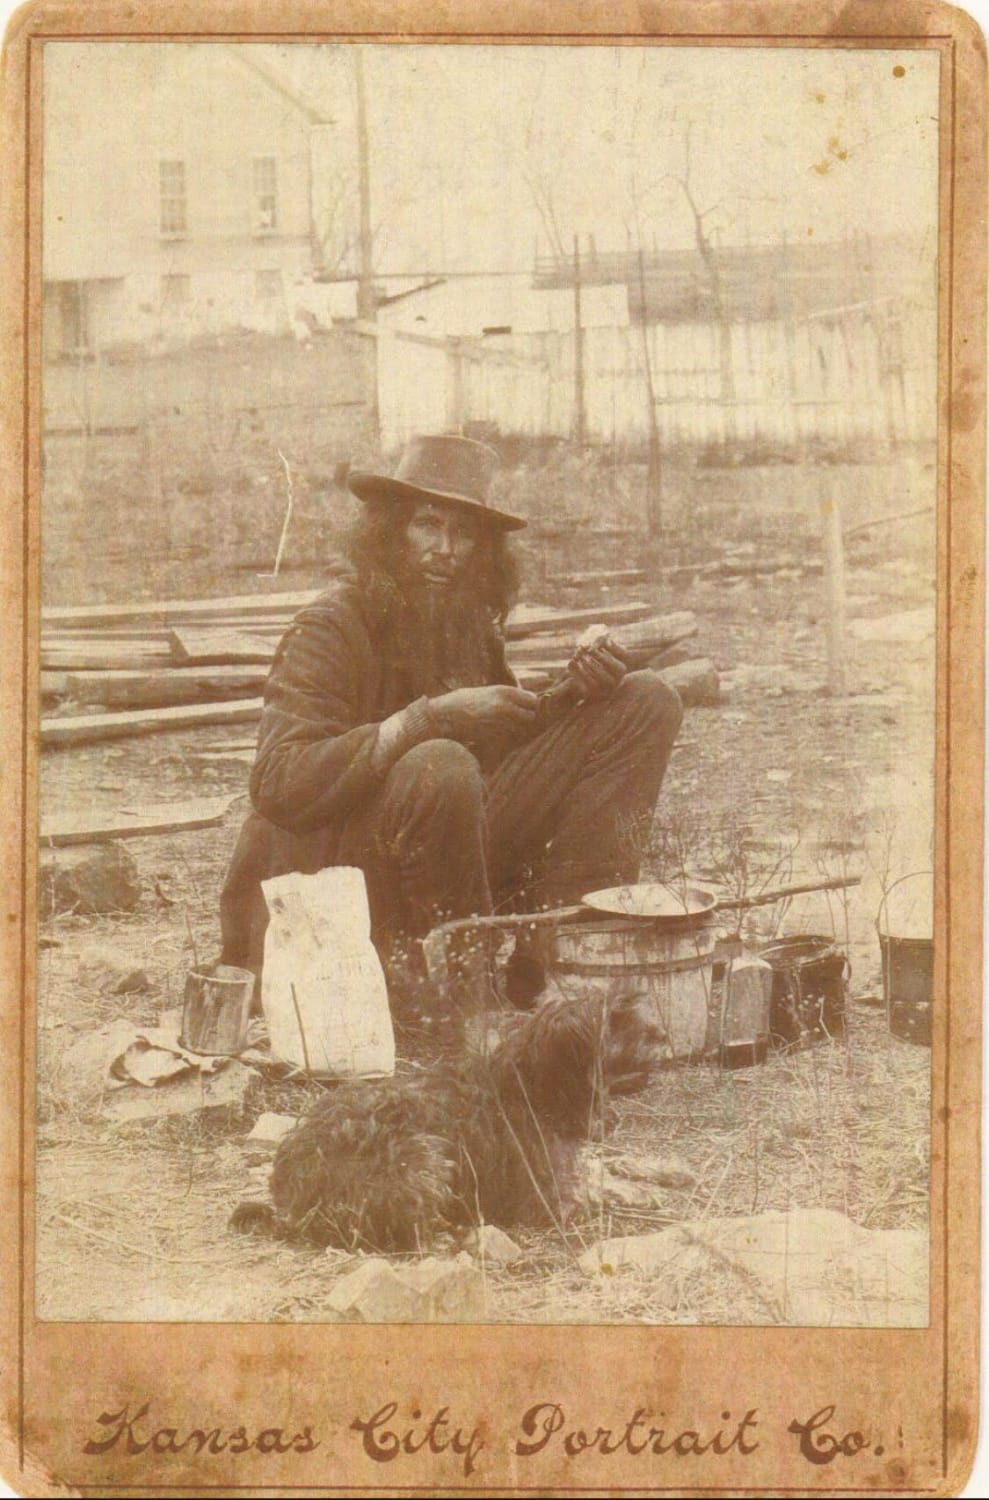 My great great great grandfather in Kansas City in the 1850s